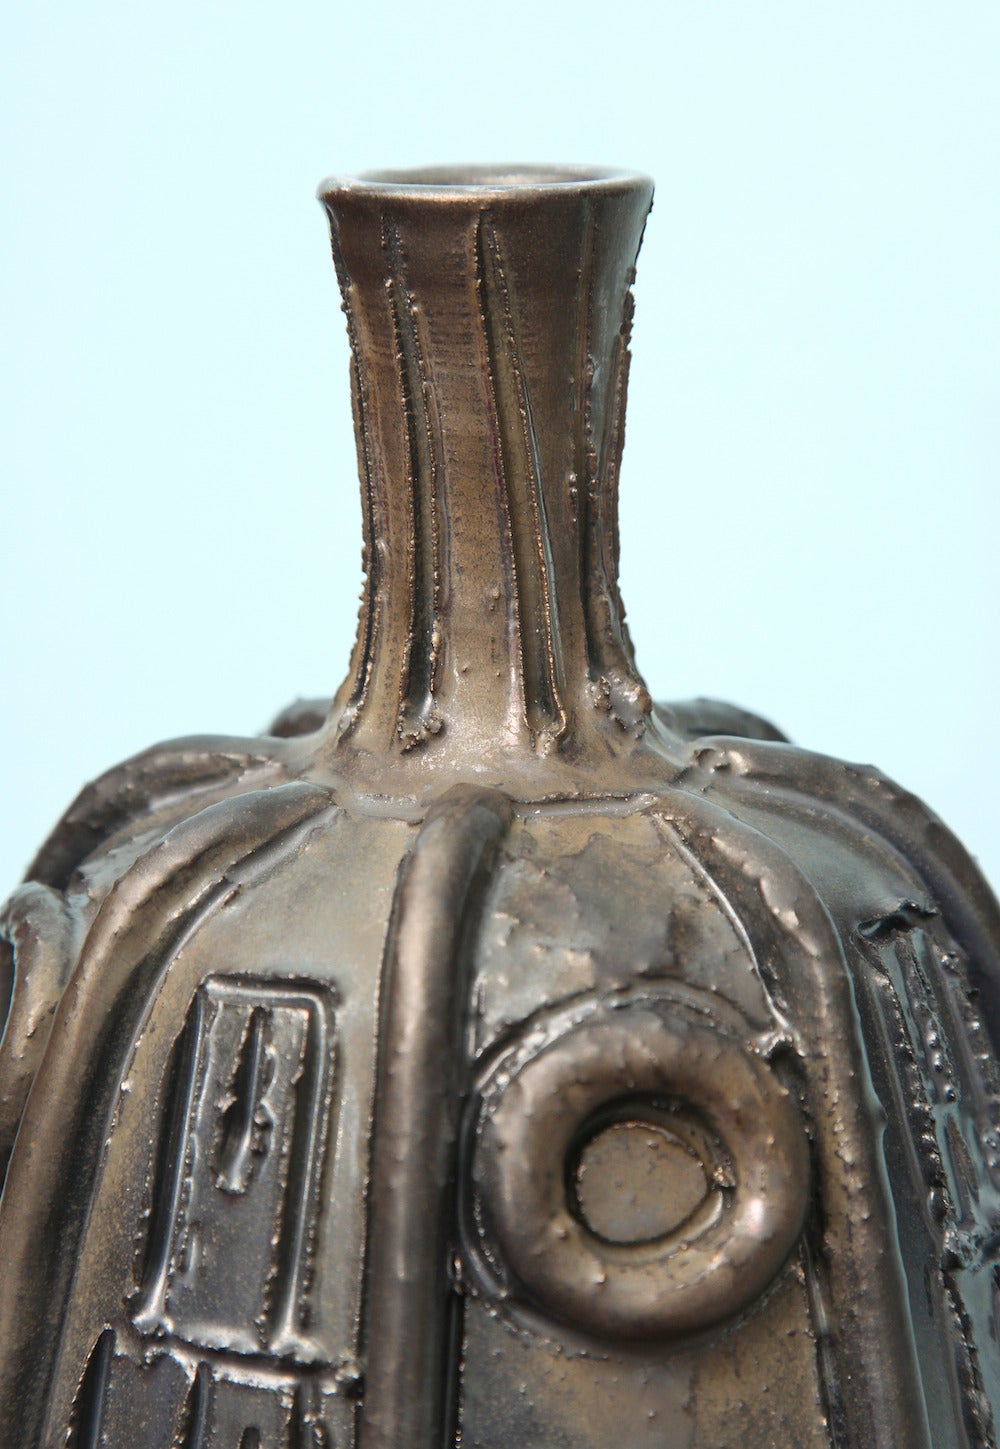 Super large and unusual bottle form with applied circles and incised decorations. Opaque glaze in gunmetal variations. Signed on underside.